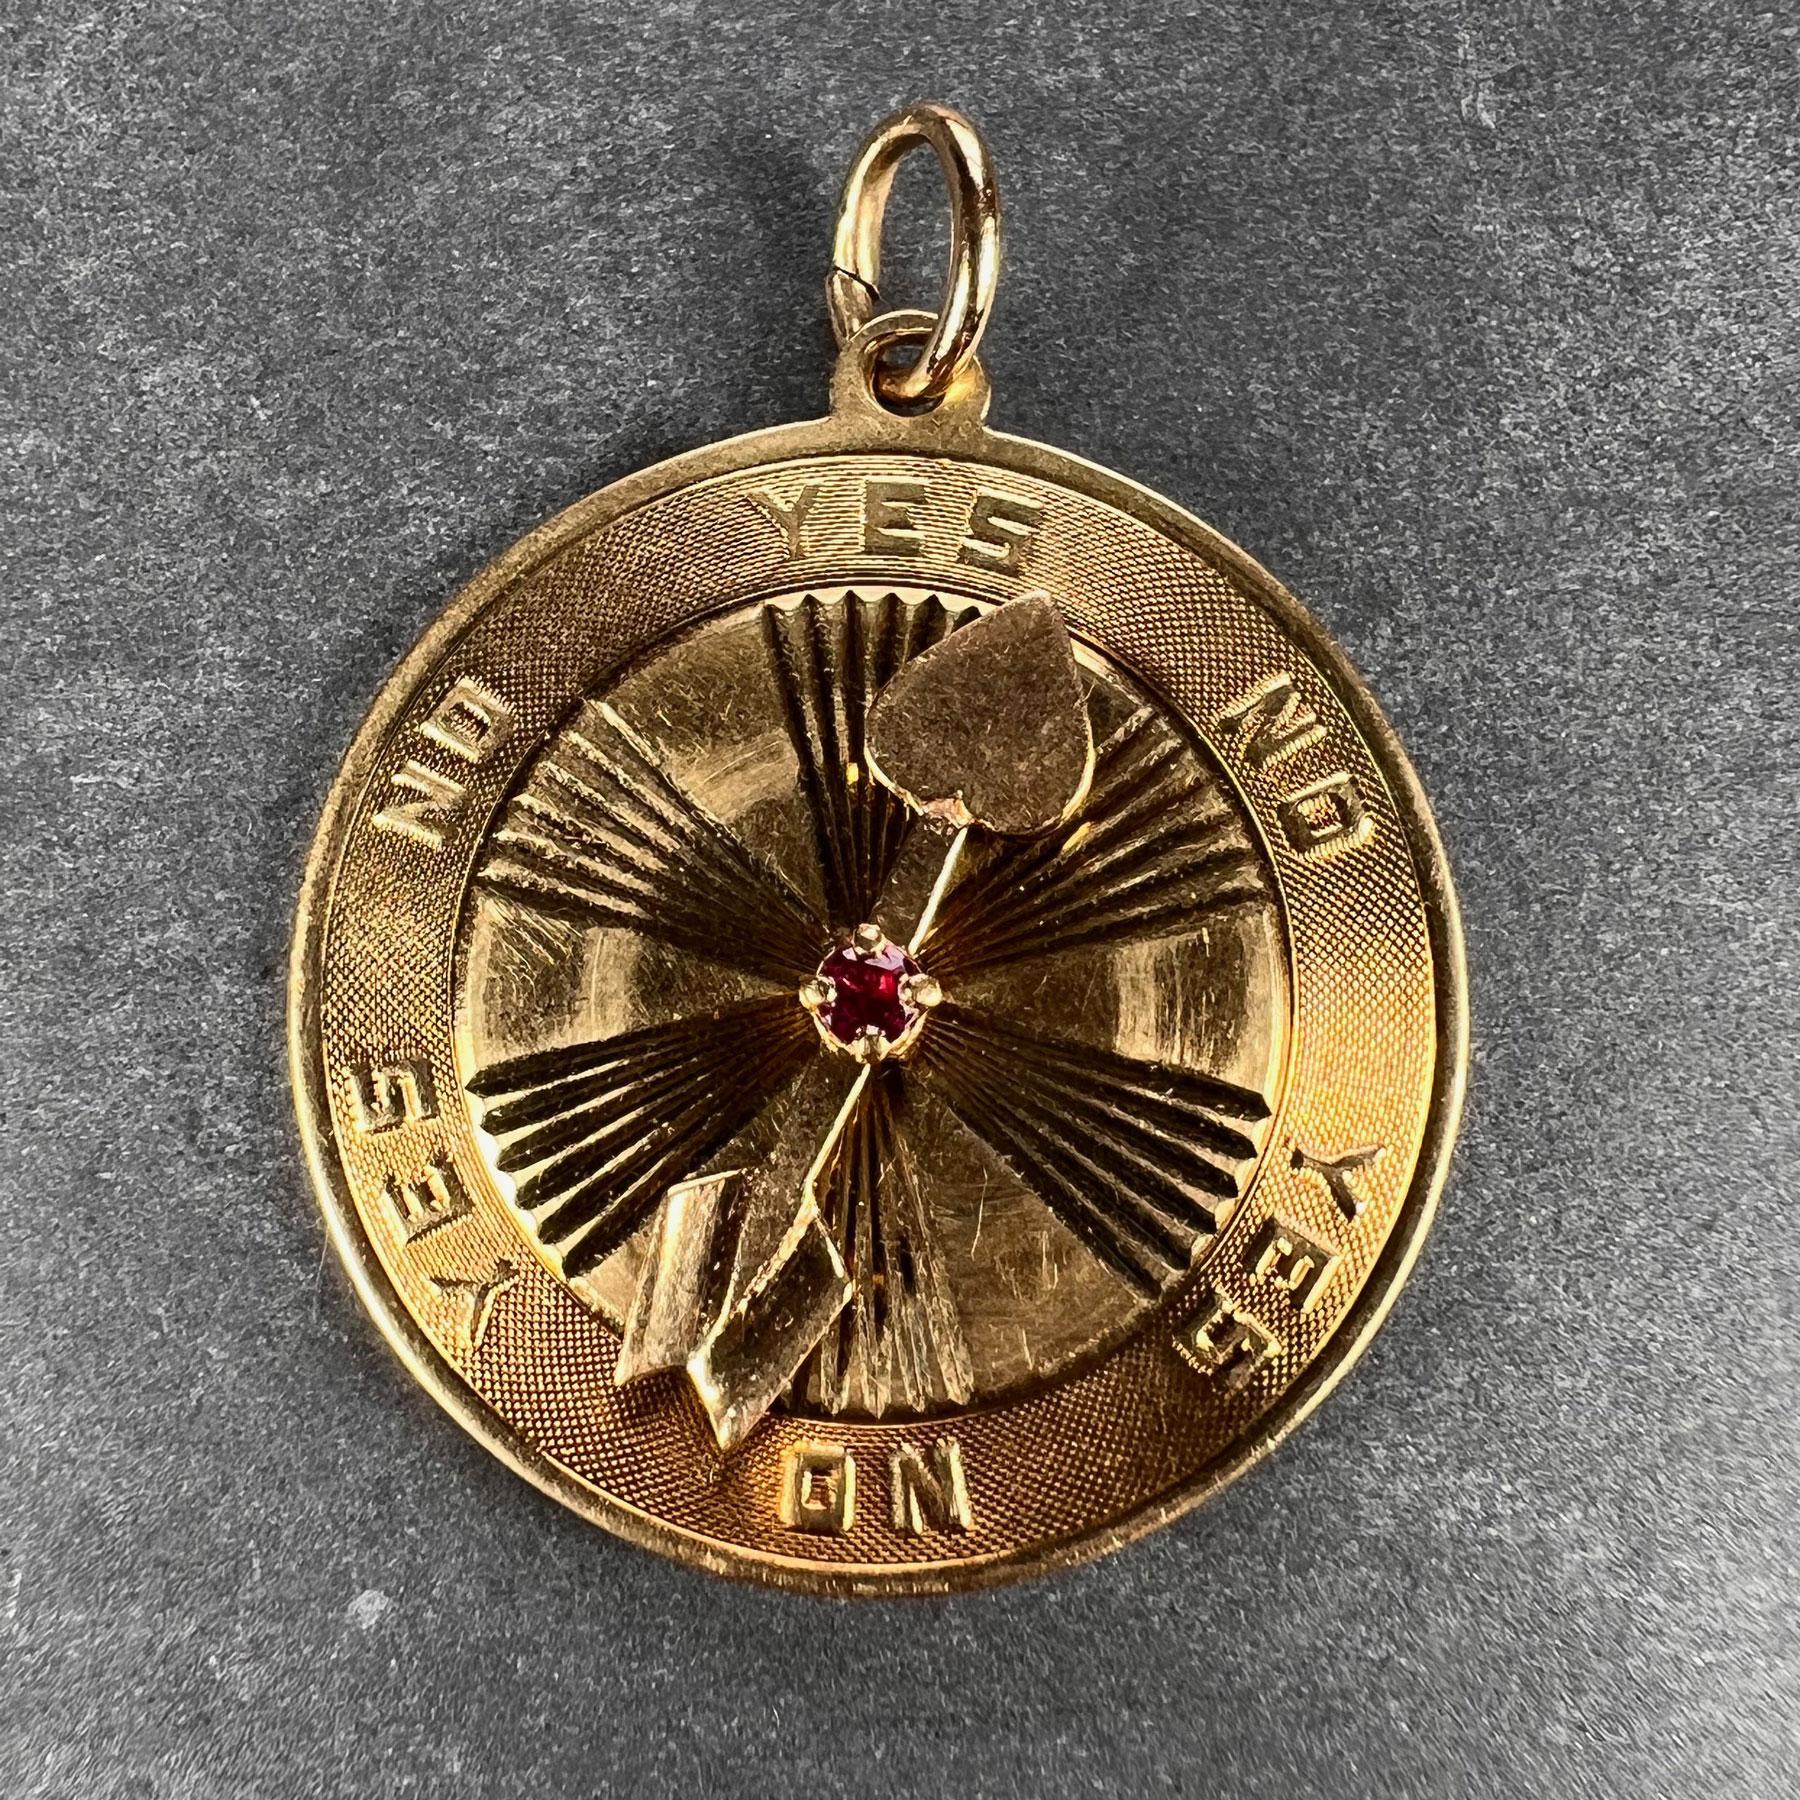 A 14 karat yellow gold charm pendant designed as a disc with yes / no options and a spinning arrow with heart tip and red ruby centre to help make decisions in love. Stamped 14K for 14 karat gold and American manufacture.

Dimensions: 3.2 x 2.6